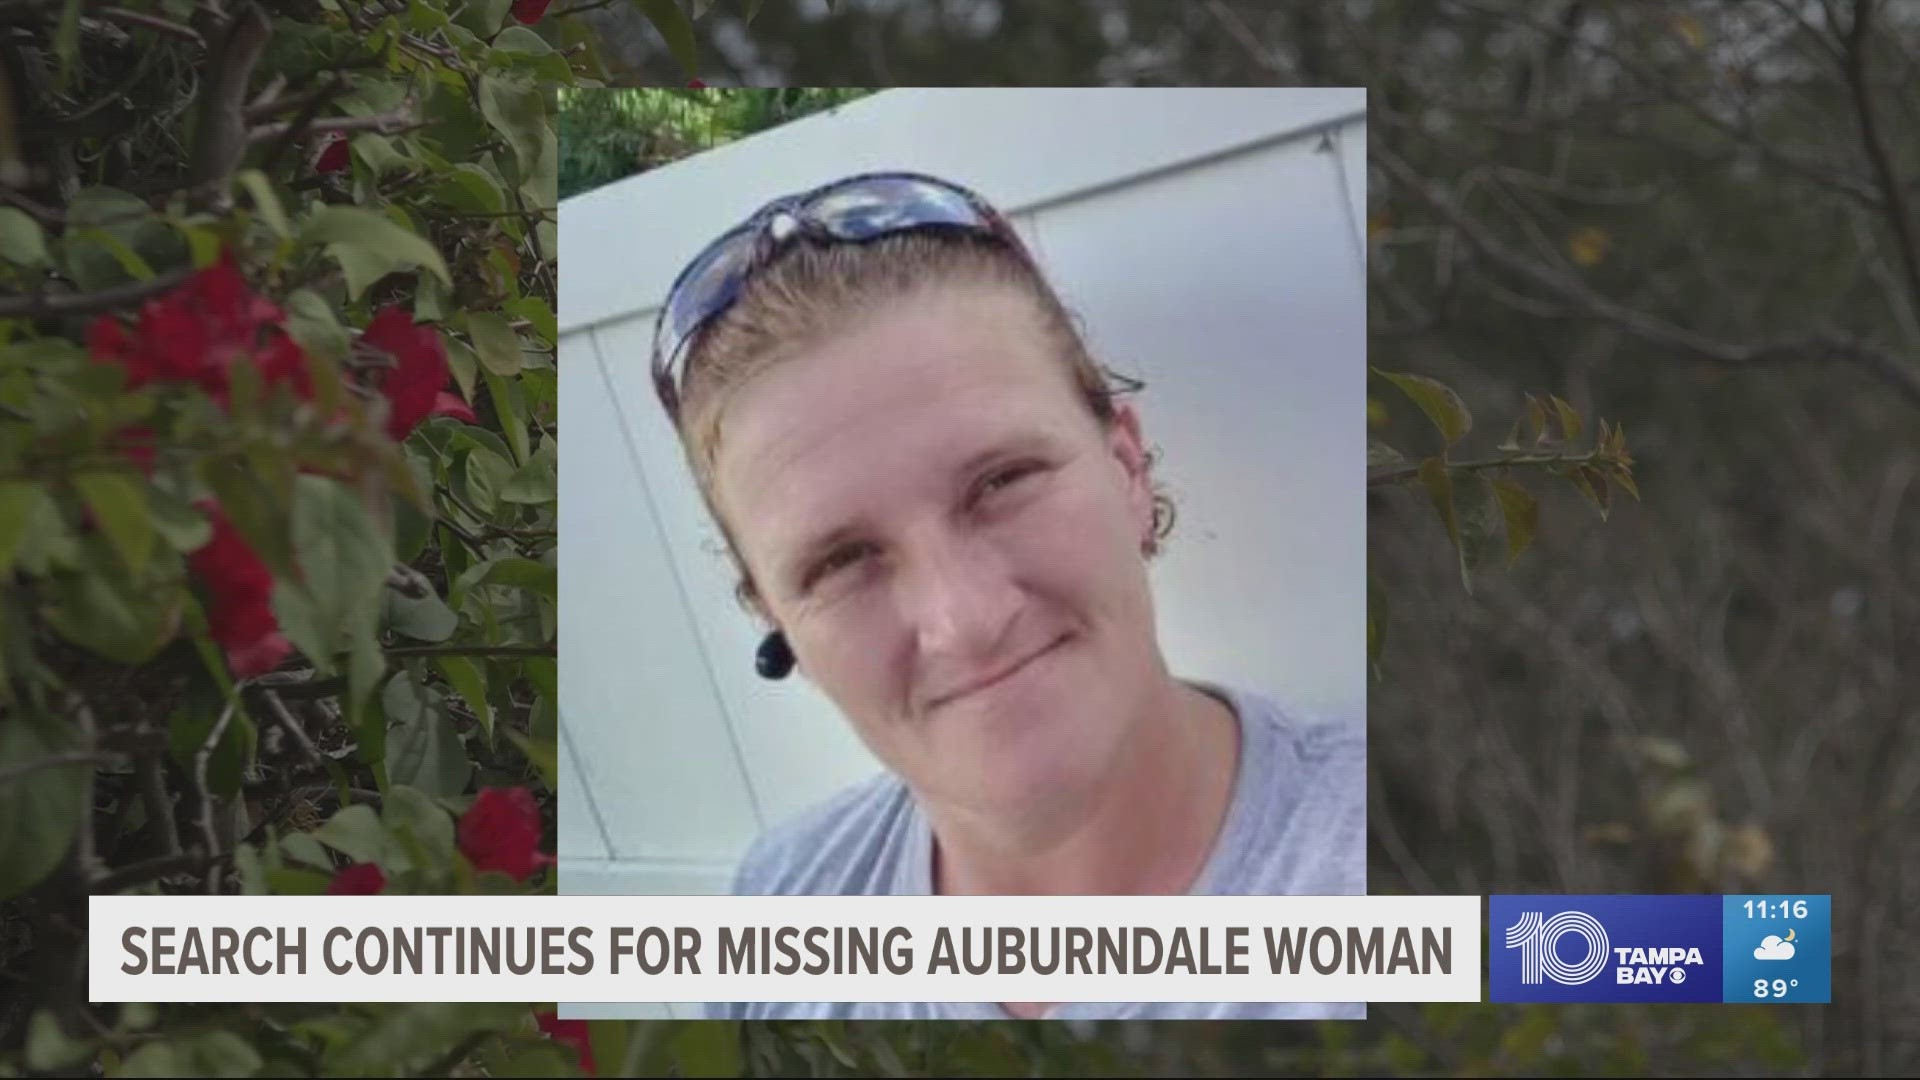 A family is left with questions and pain after Tonya Whipp went missing in May. Now the community is coming together in hopes of finding her.